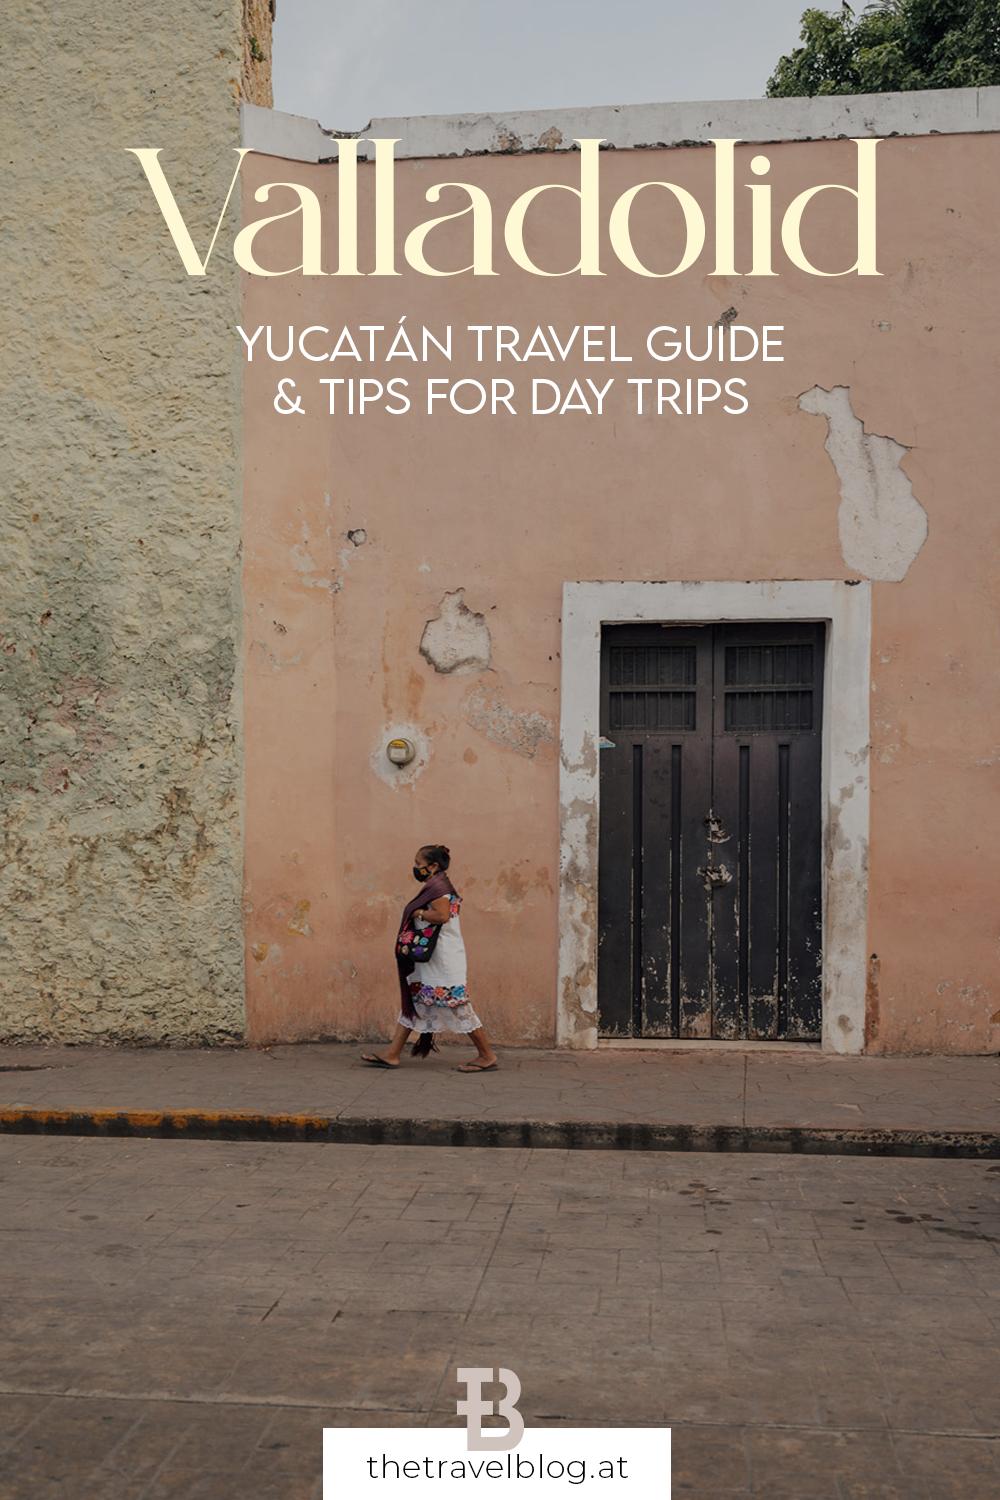 Travel guide for Valladolid - with day trips, restaurants, hotels and Chichén-Itzá